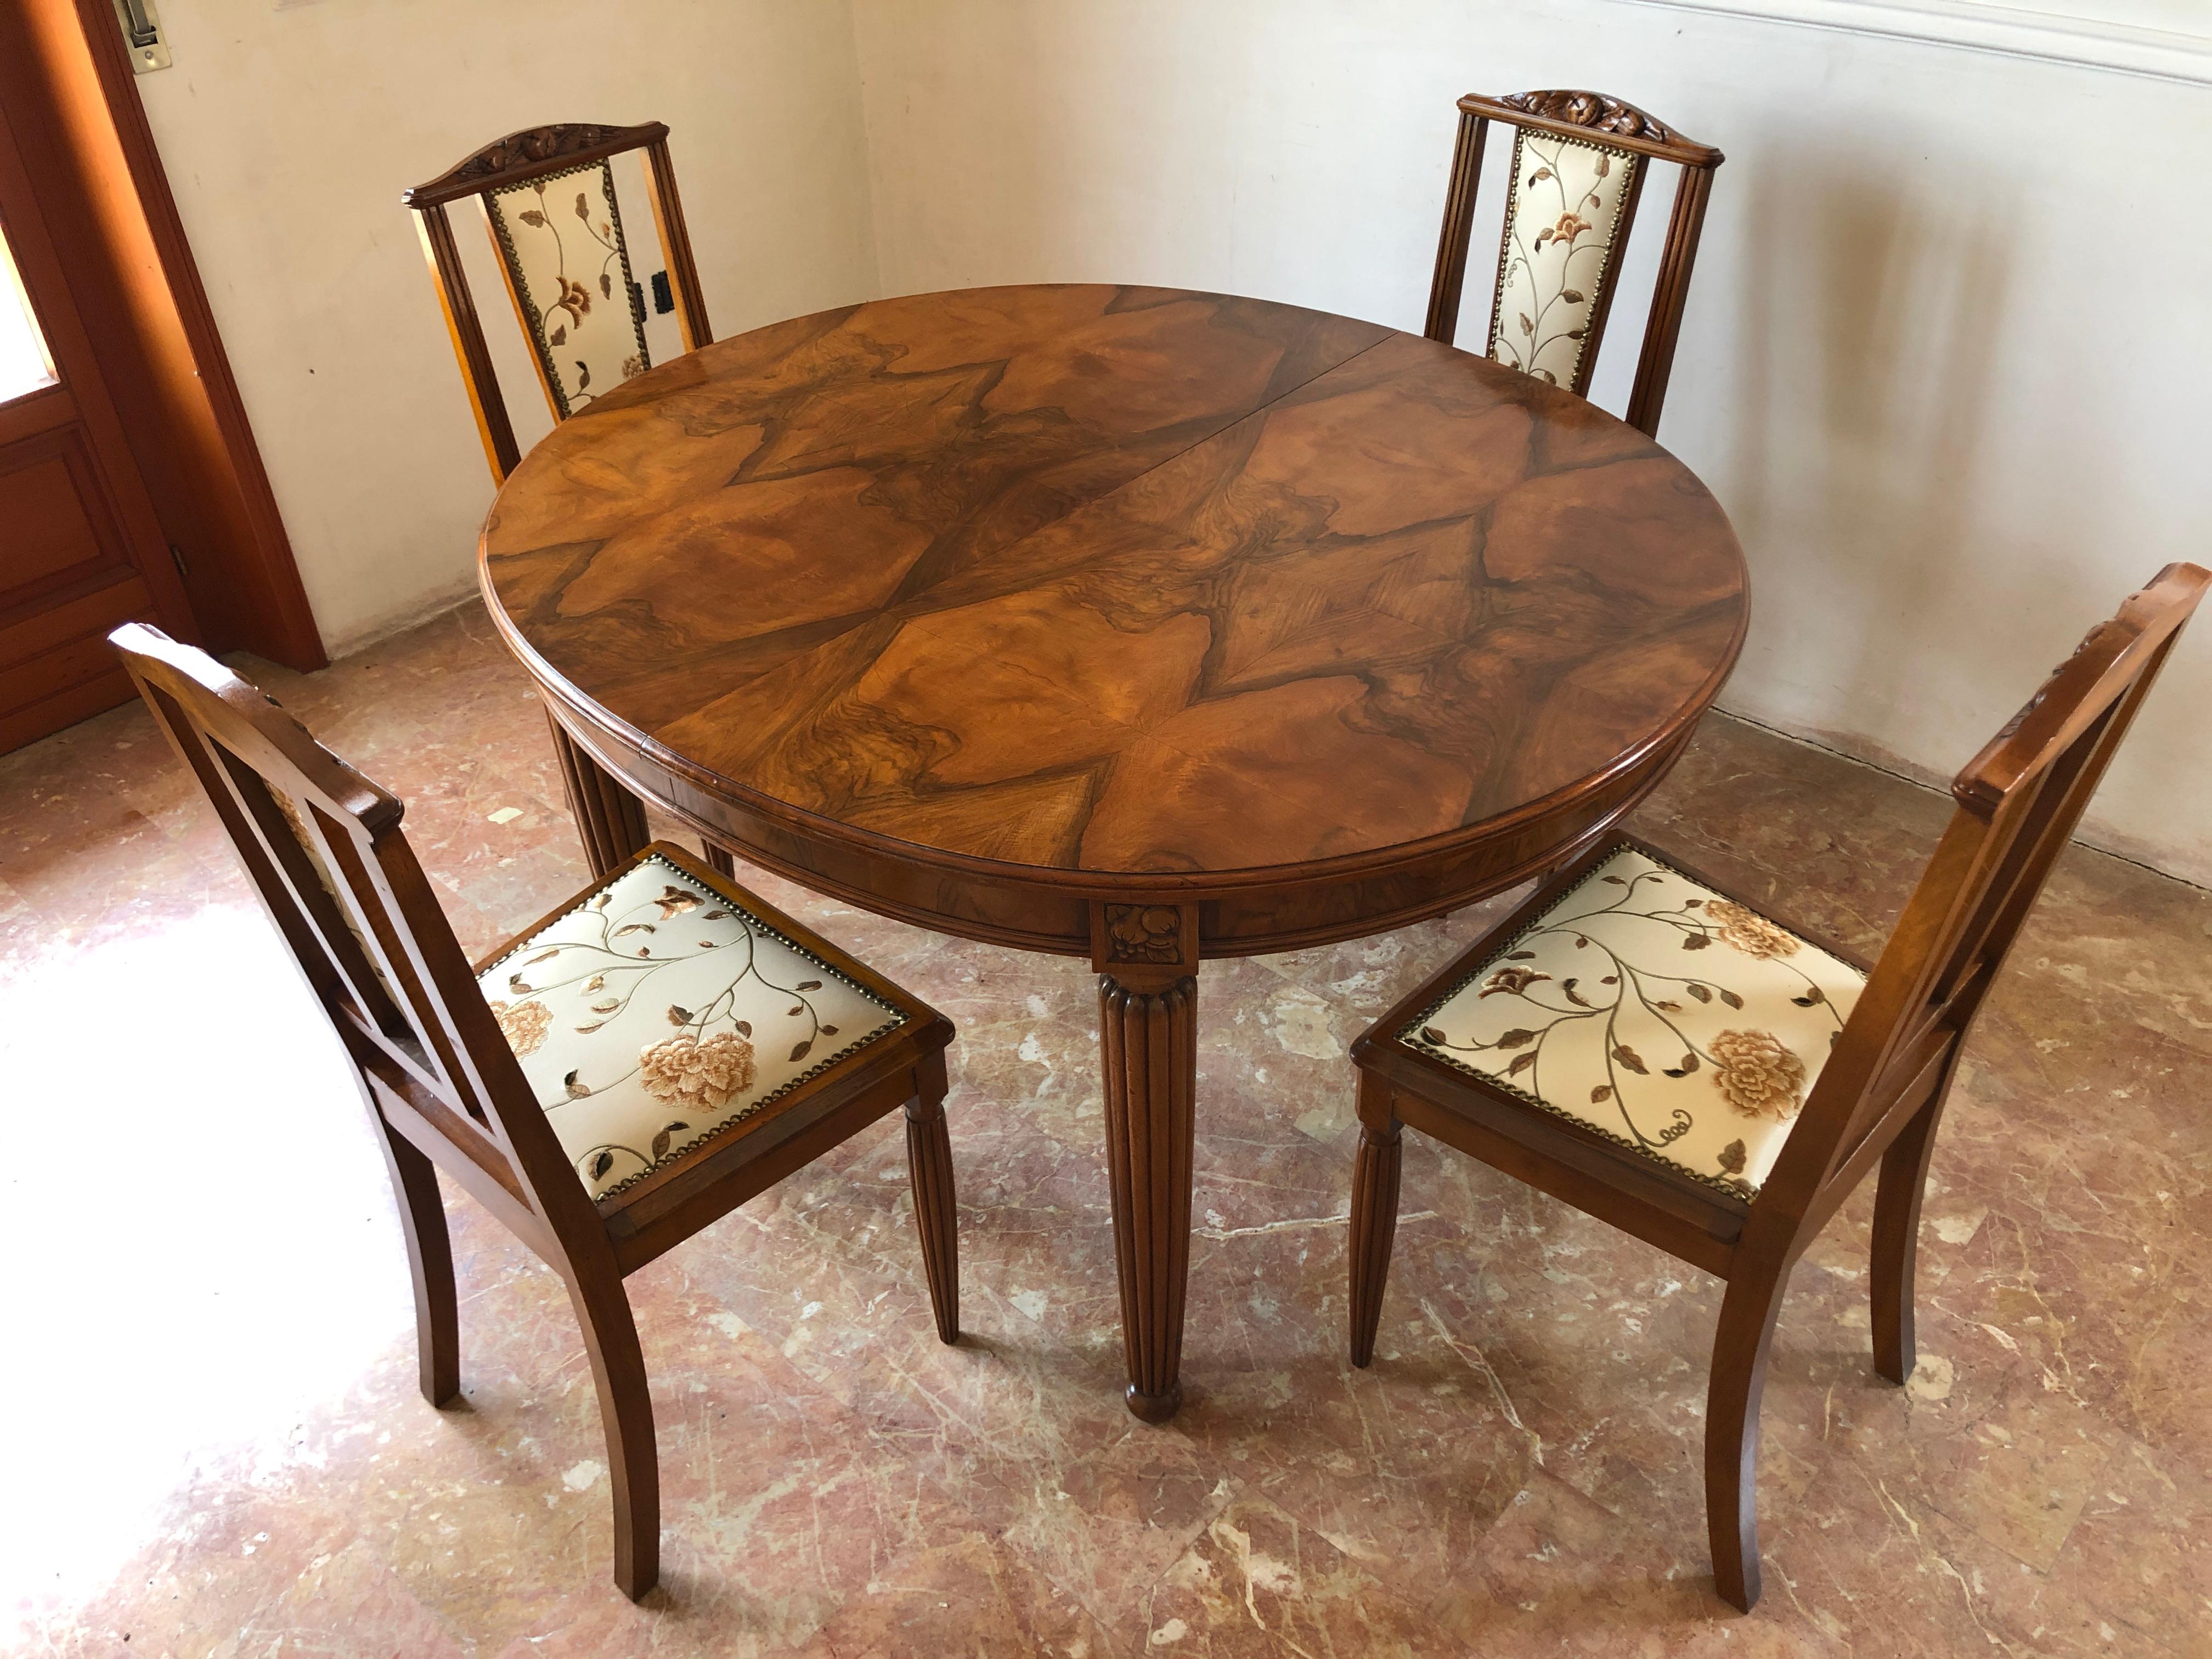 French liberty Art Nouveau dining set composed by a dining table in a very valuable walnut feather, grooved legs with naturalistic motif, characteristic elements of the period and six beautiful chairs with decorative inlays on the backs, grooved